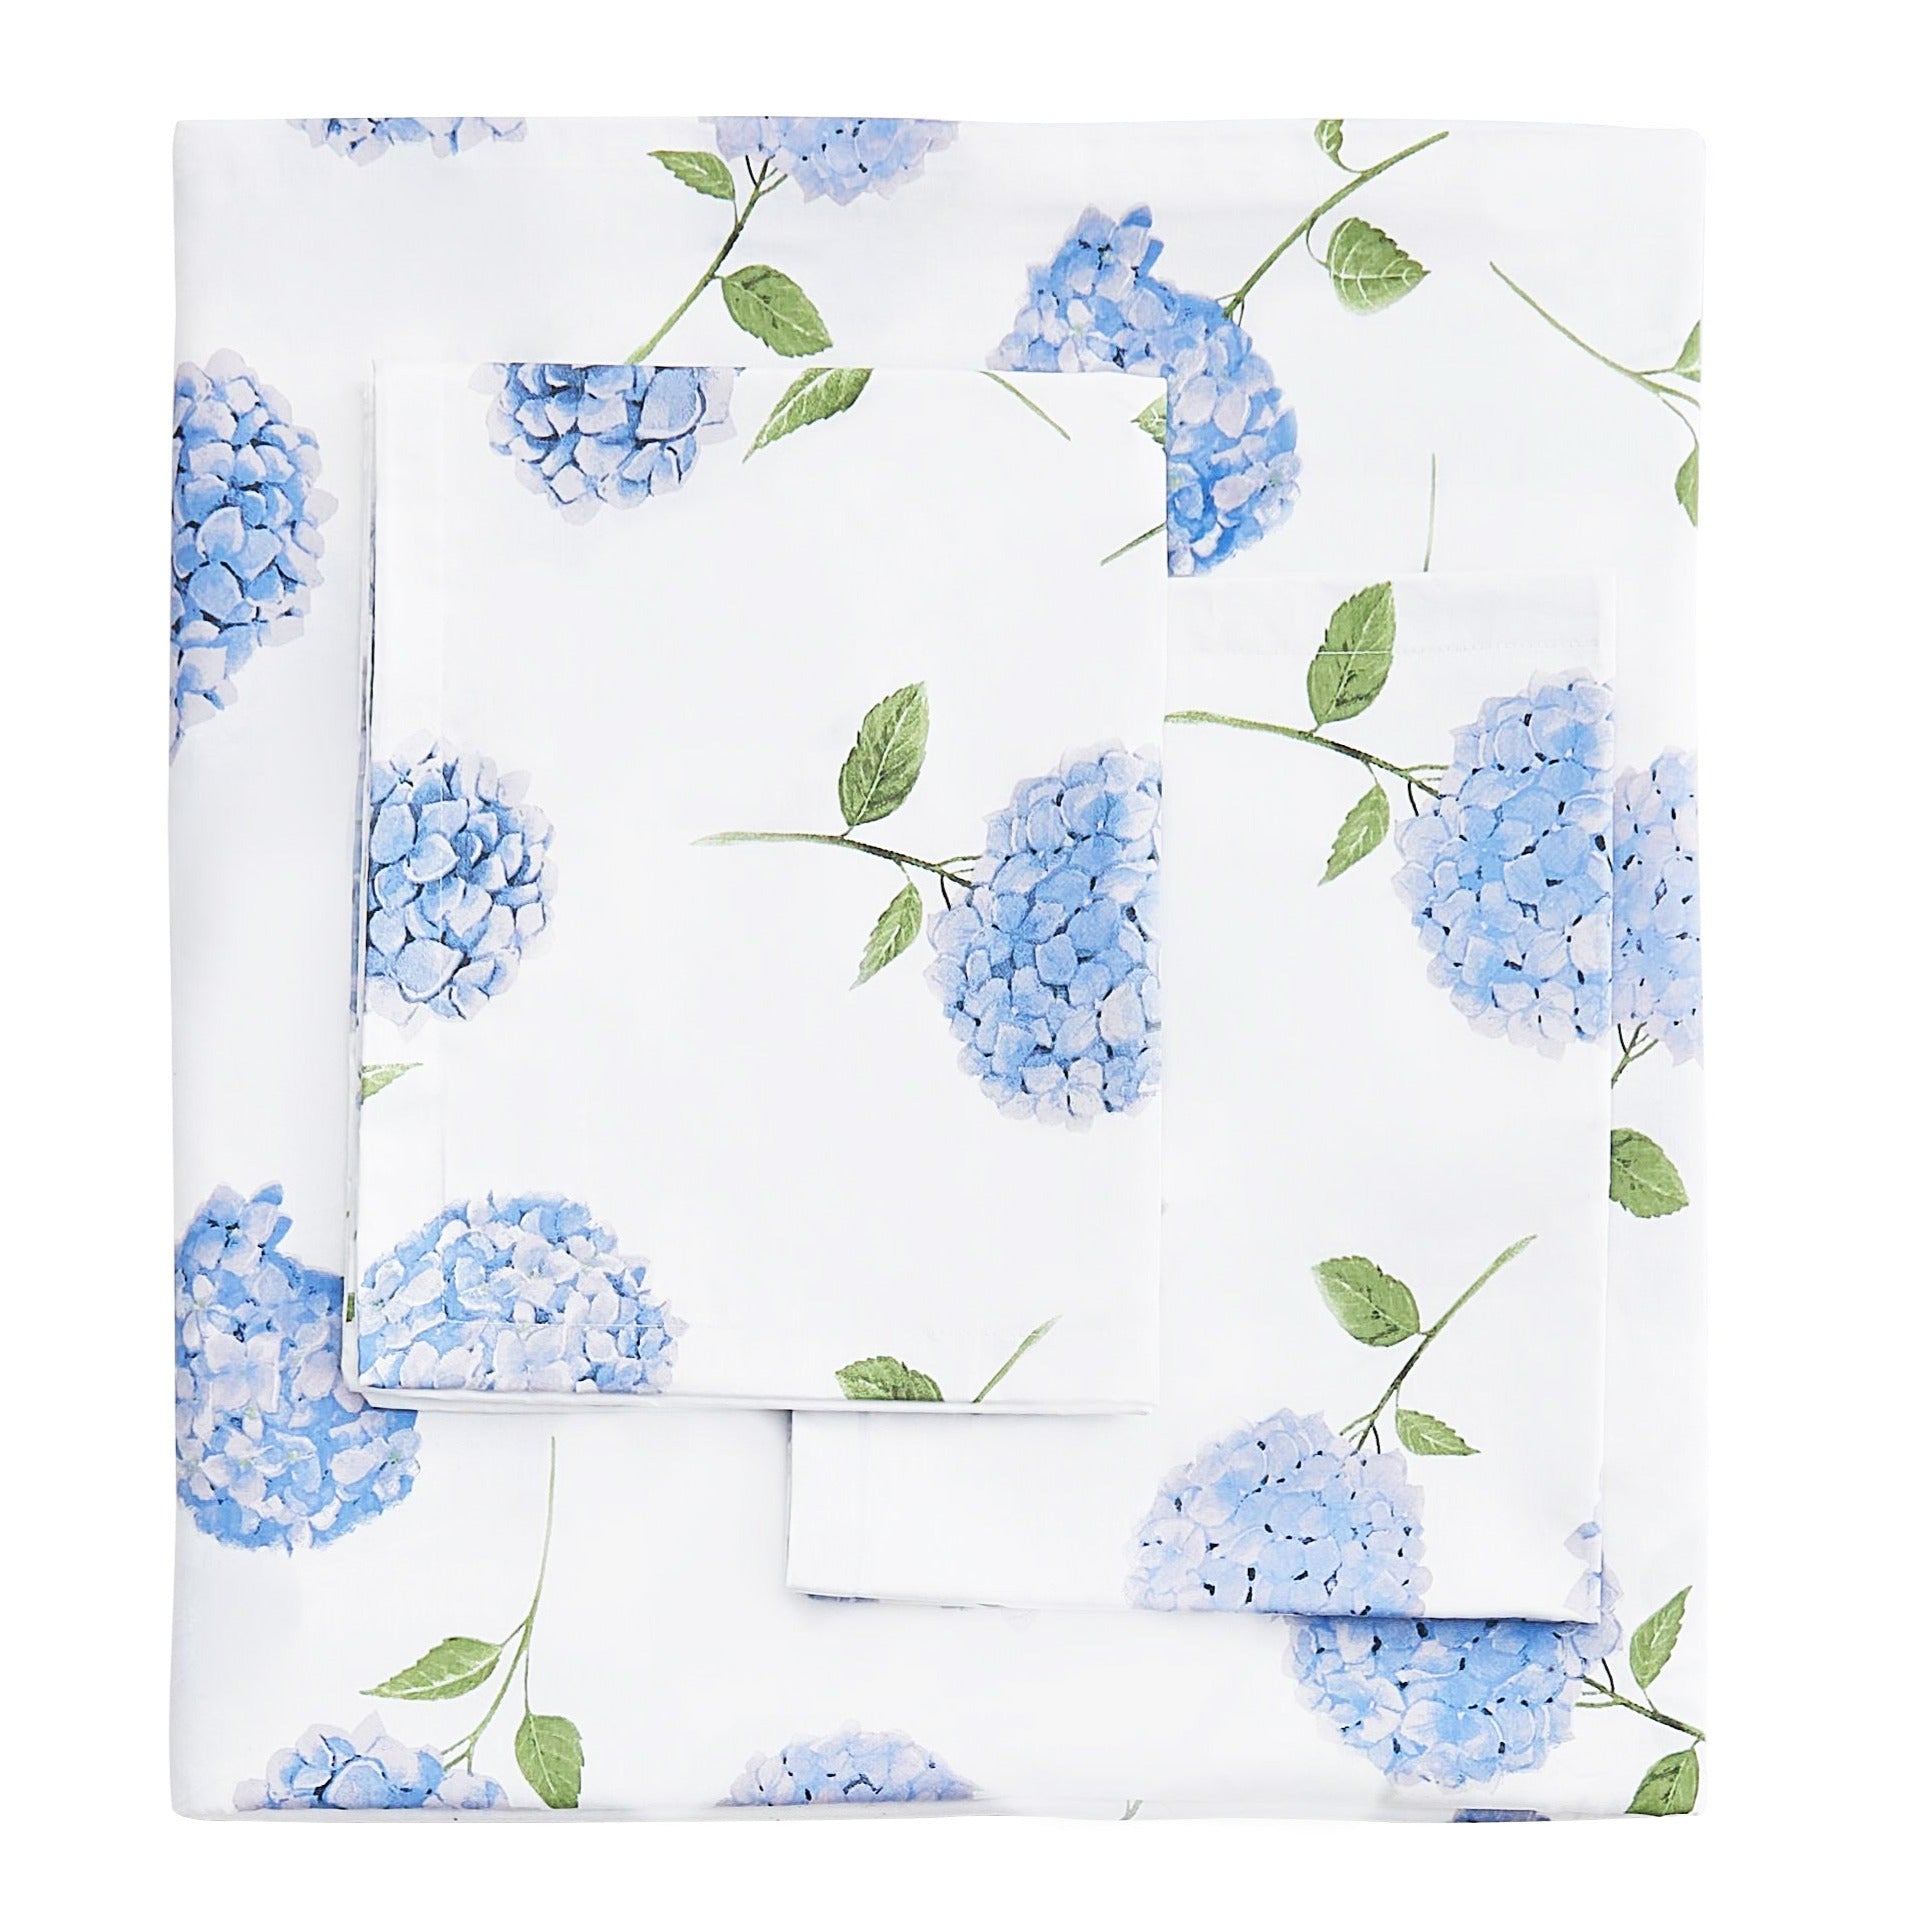 Plympt Hemstitched with Embroidered Hydrangea 20 Cotton Napkin (Set of 6) Ophelia & Co. Color: White/Blue